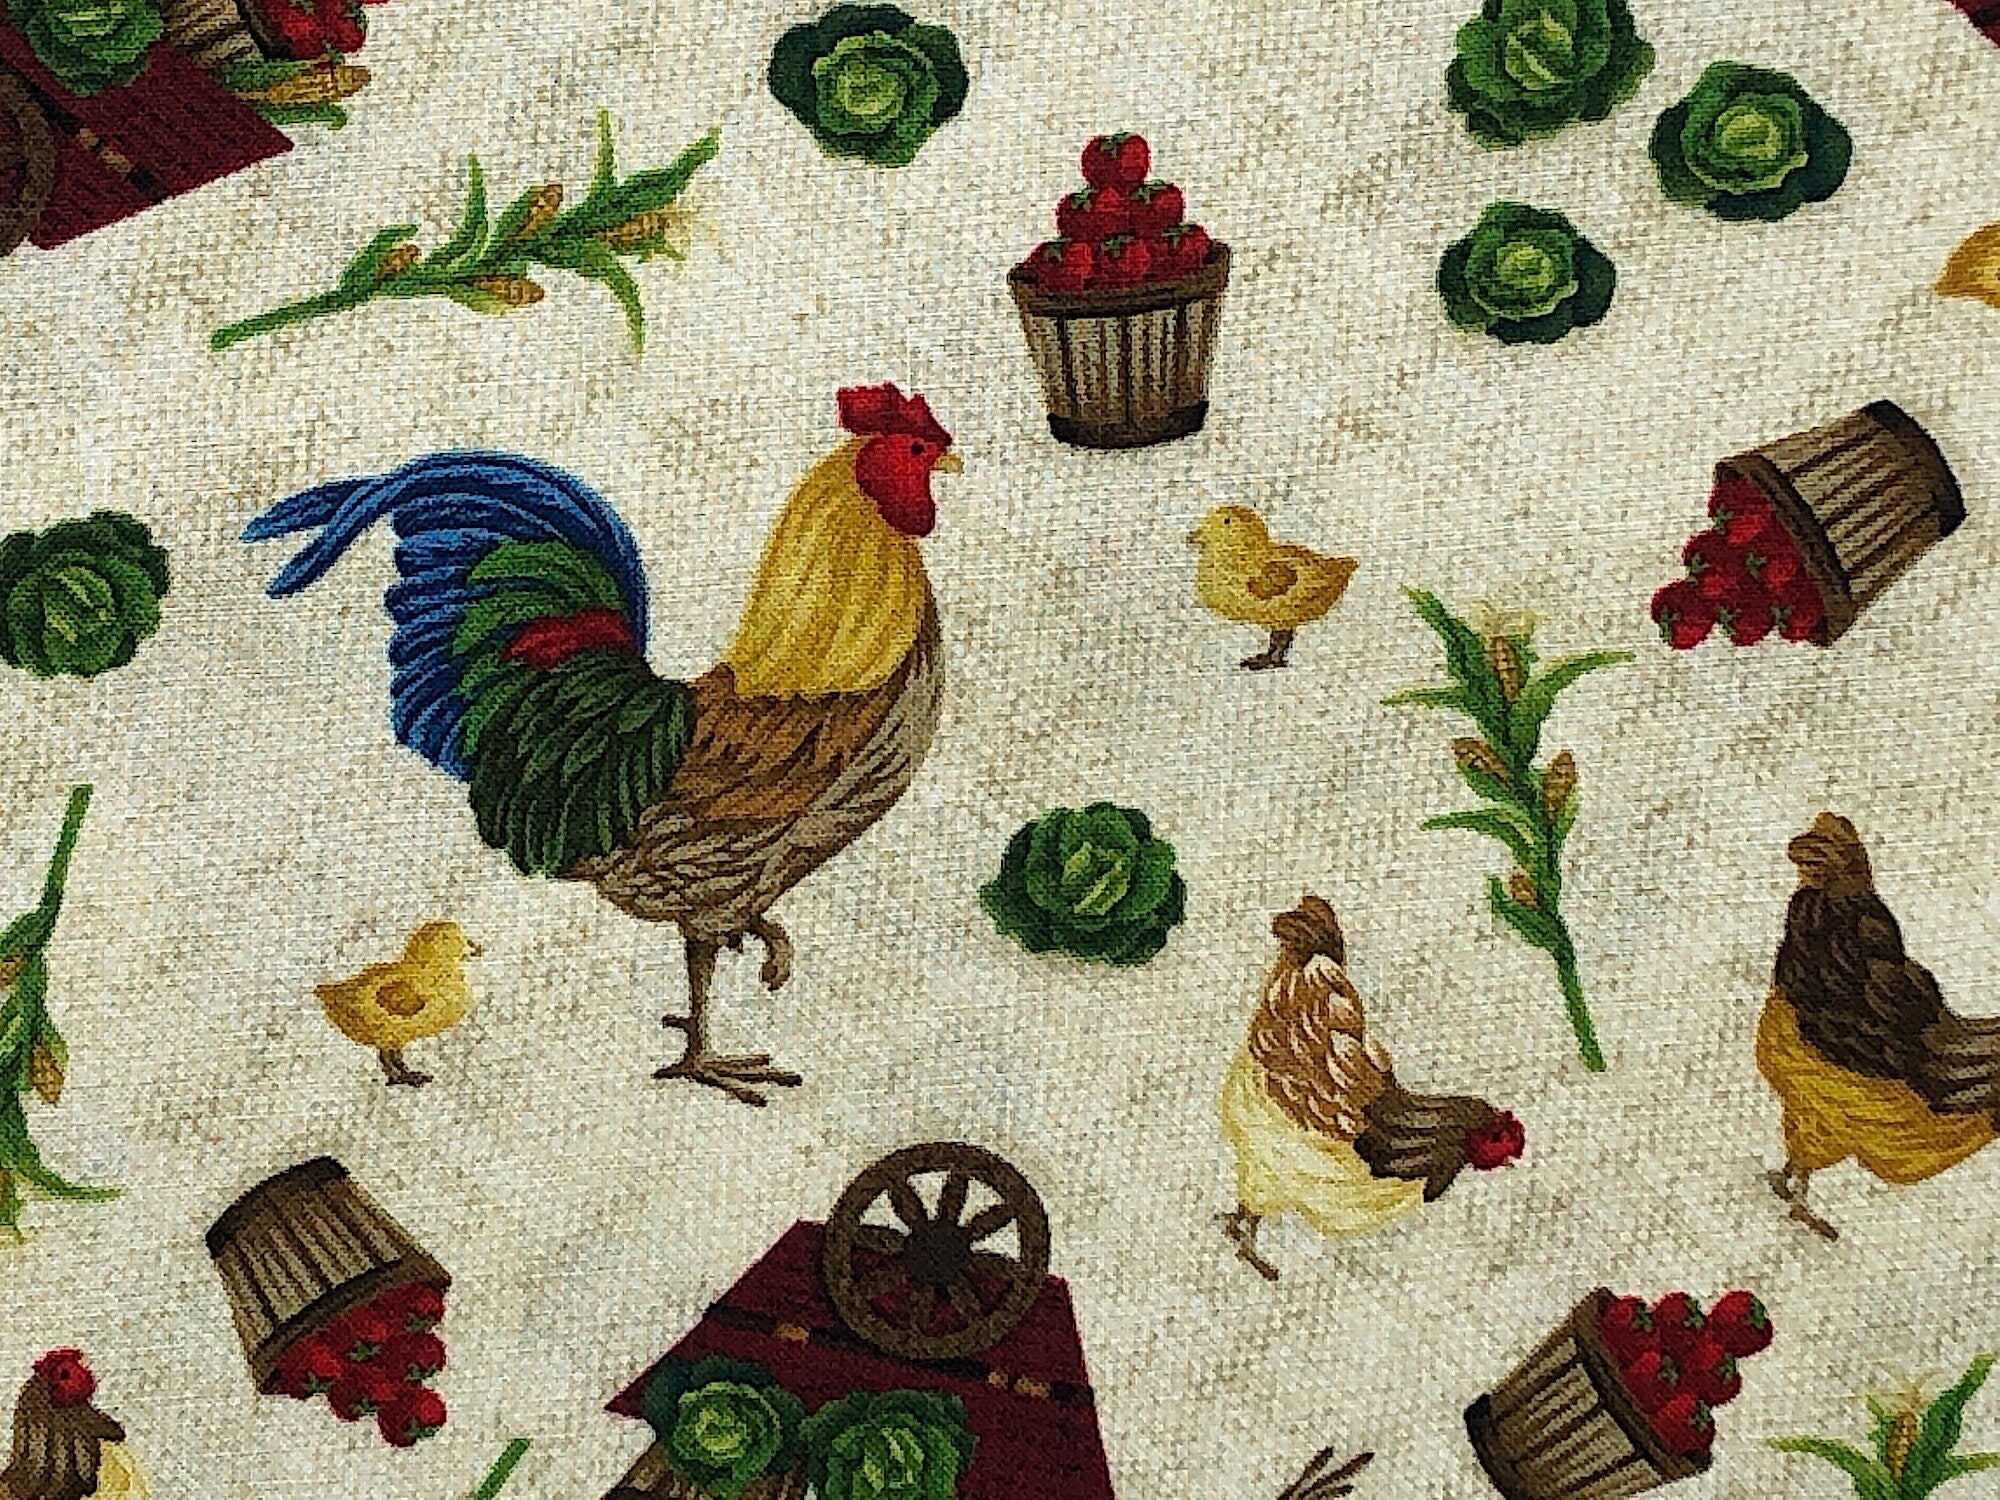 Close up of rooster, lettuce, apples and more.